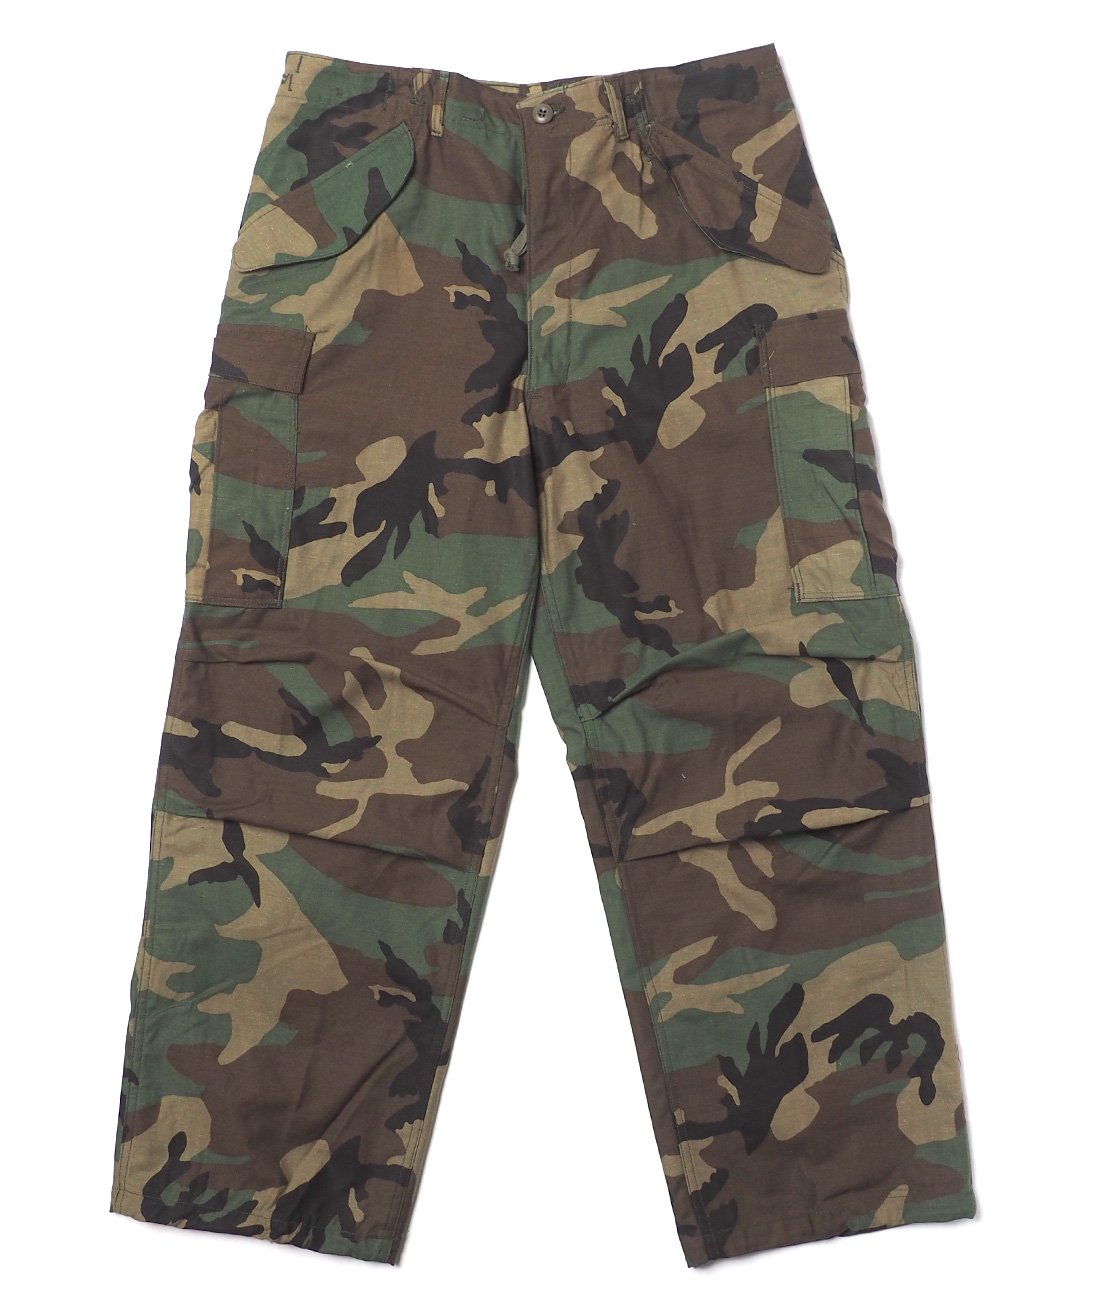 DEAD STOCK】80s US ARMY M-65 TROUSERS - WOODLAND CAMO アメリカ軍